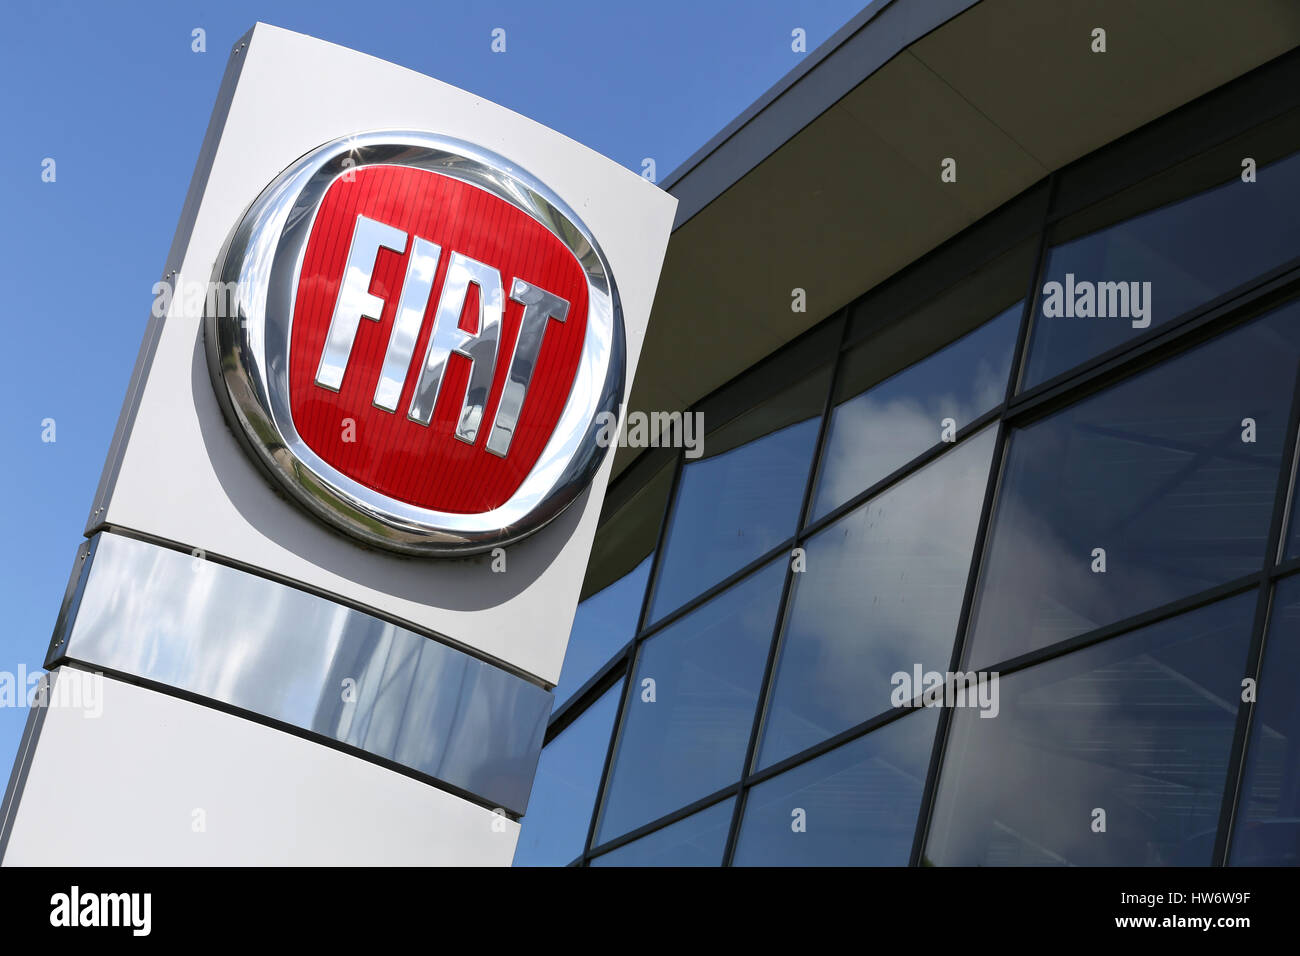 Fiat dealership sign in front of the showroom Stock Photo